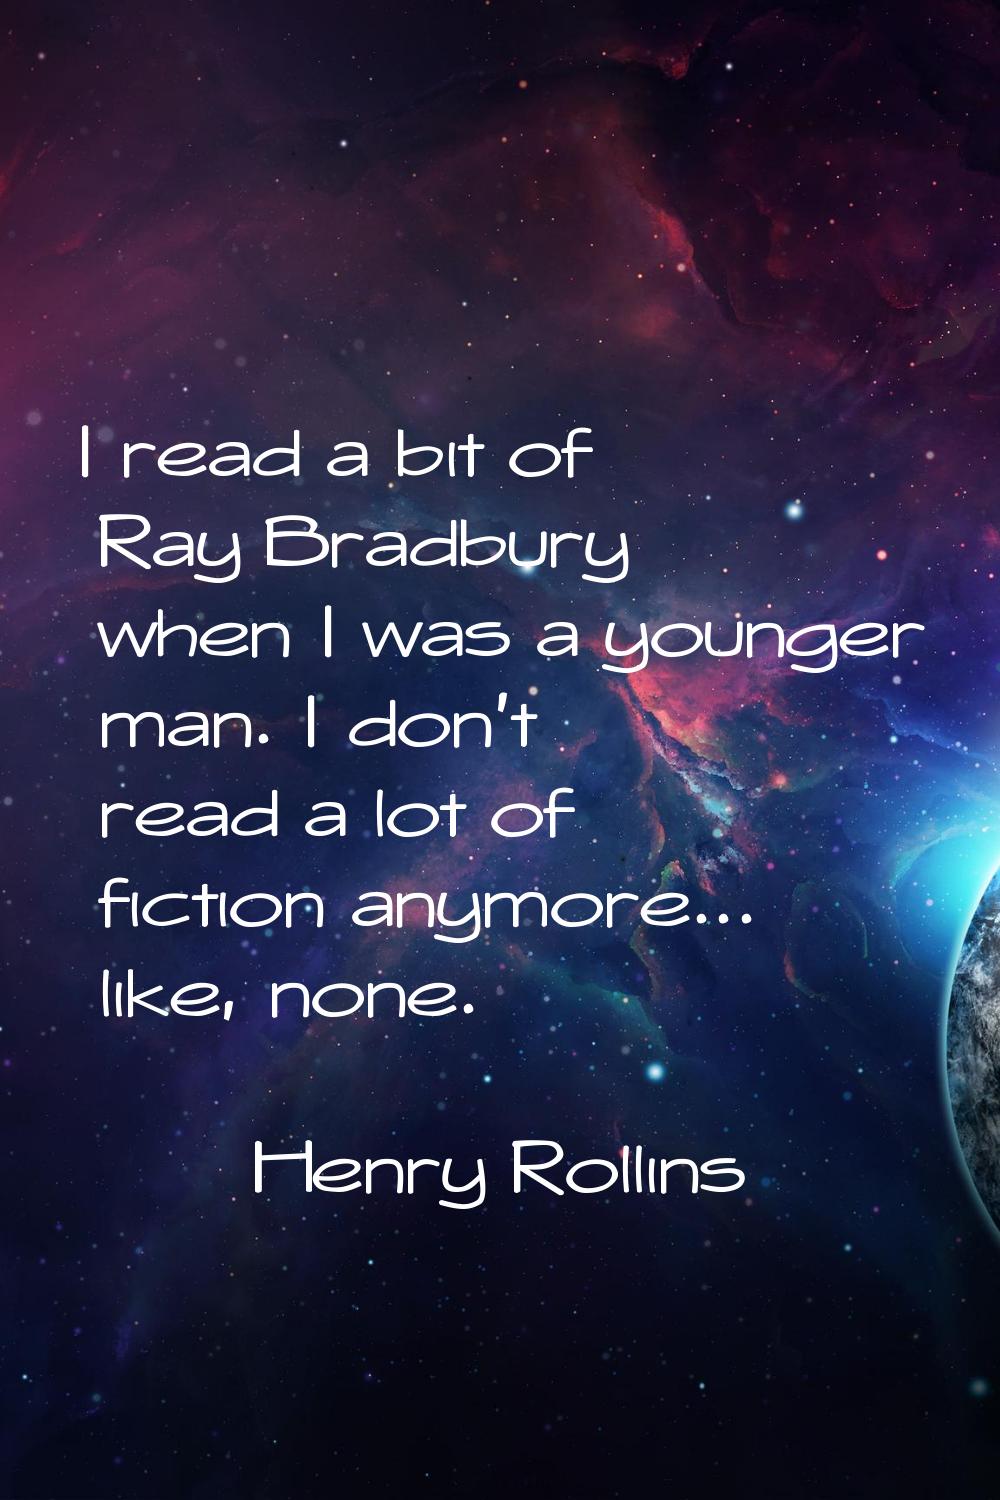 I read a bit of Ray Bradbury when I was a younger man. I don't read a lot of fiction anymore... lik